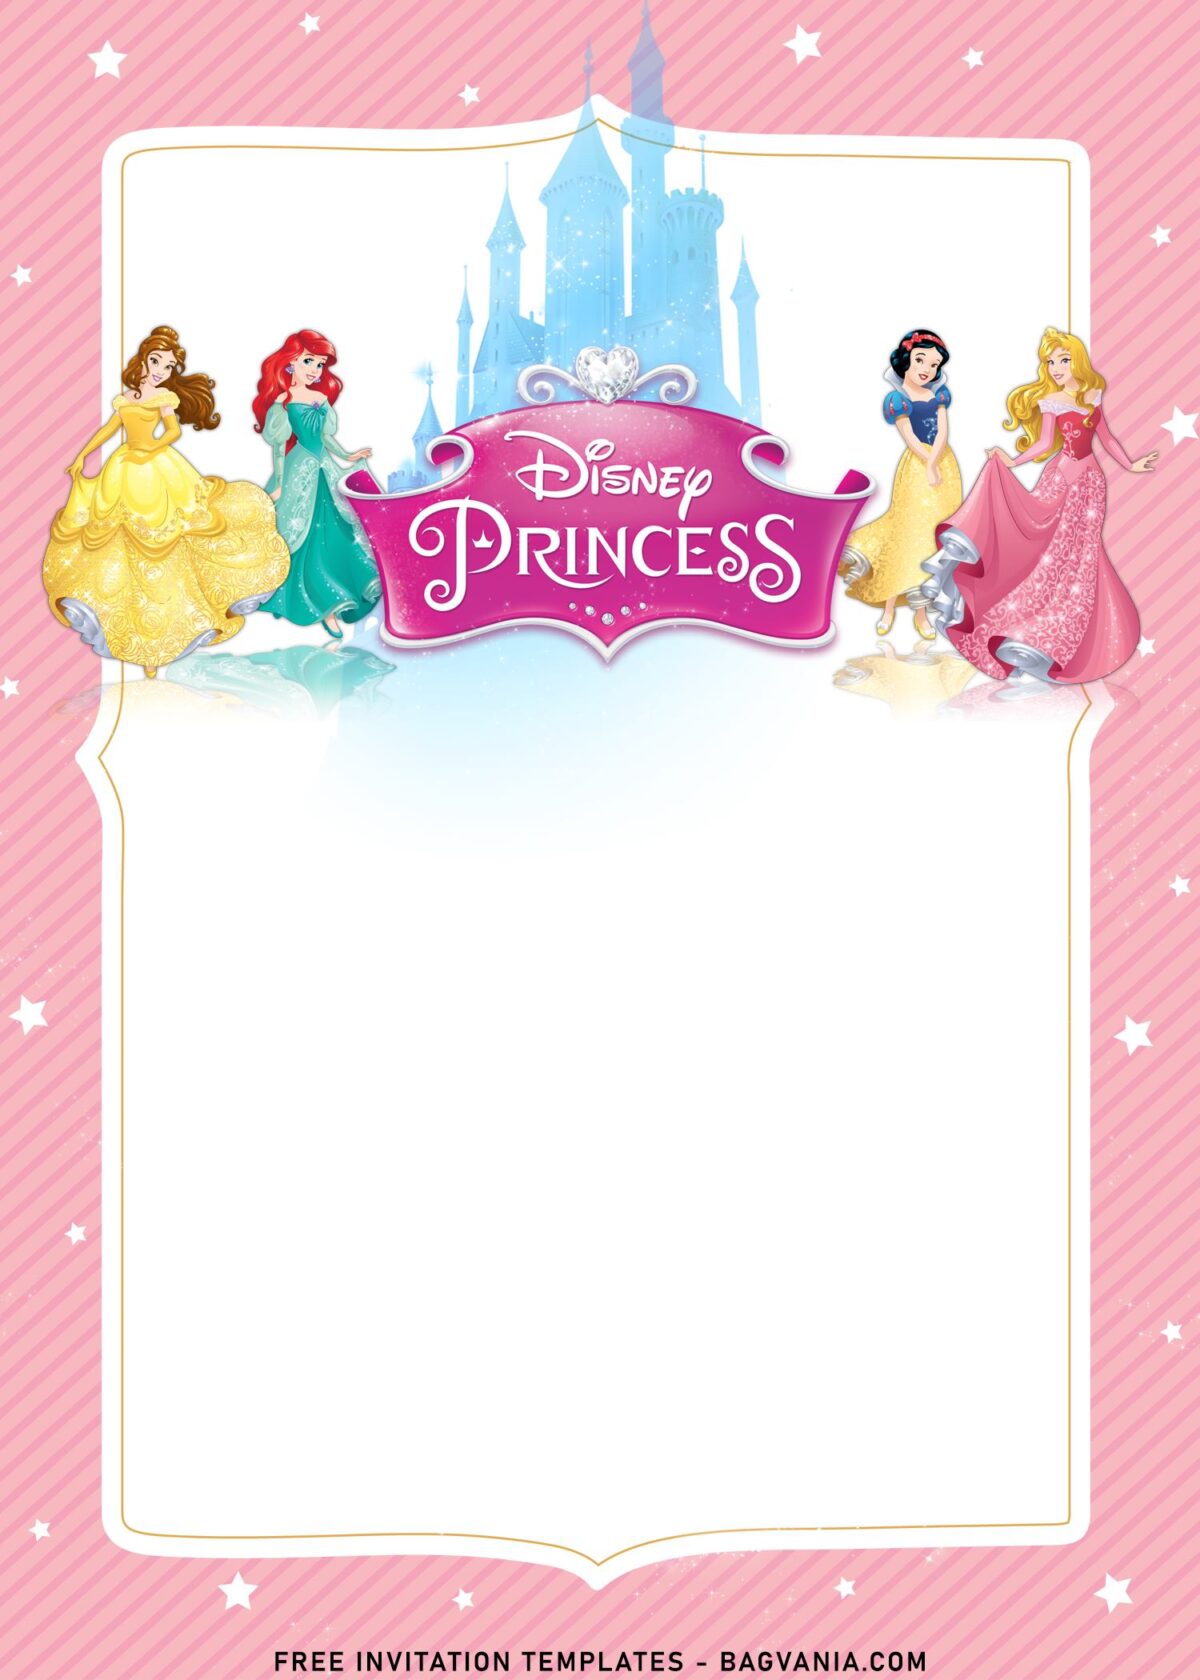 9+ Disney Princess And Castle Birthday Invitation Templates with adorable Belle Beauty and The Beast